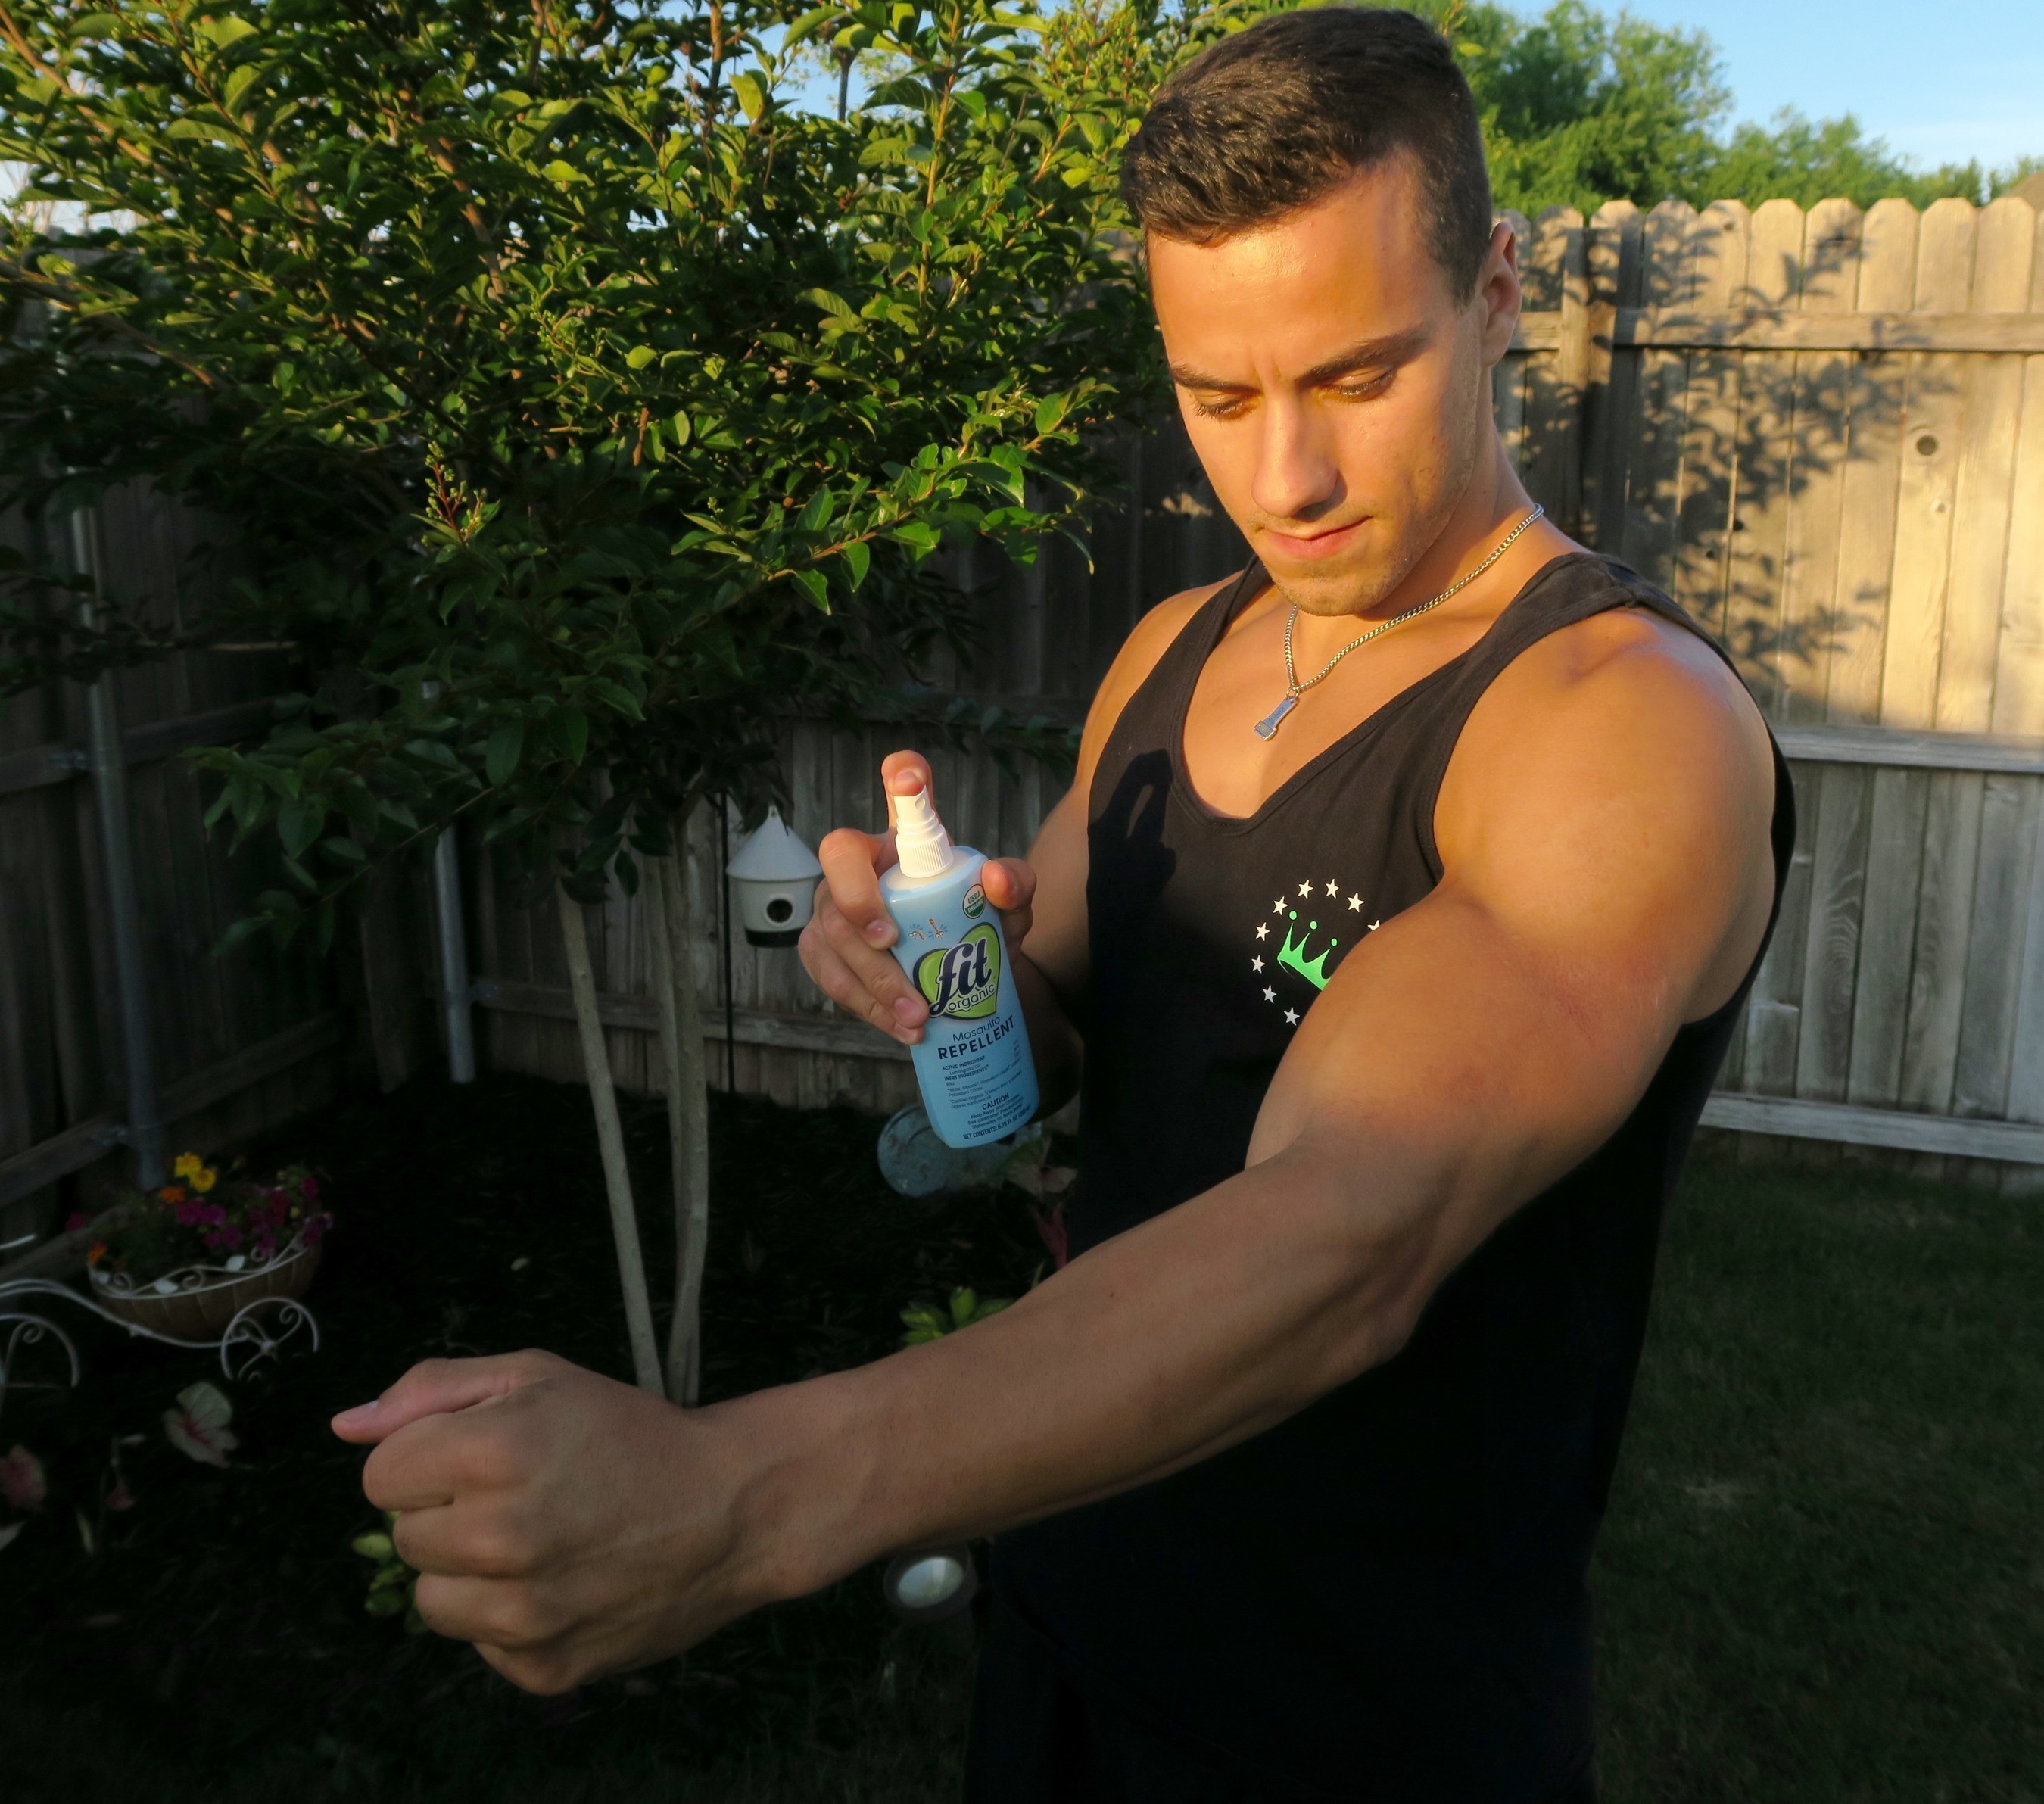 U.S. Olympian Jake Dalton signs on as Brand Ambassador for Fit Organic Mosquito Repellent.  Jake will use the product to protect himself and his family as he competes in Brazil.